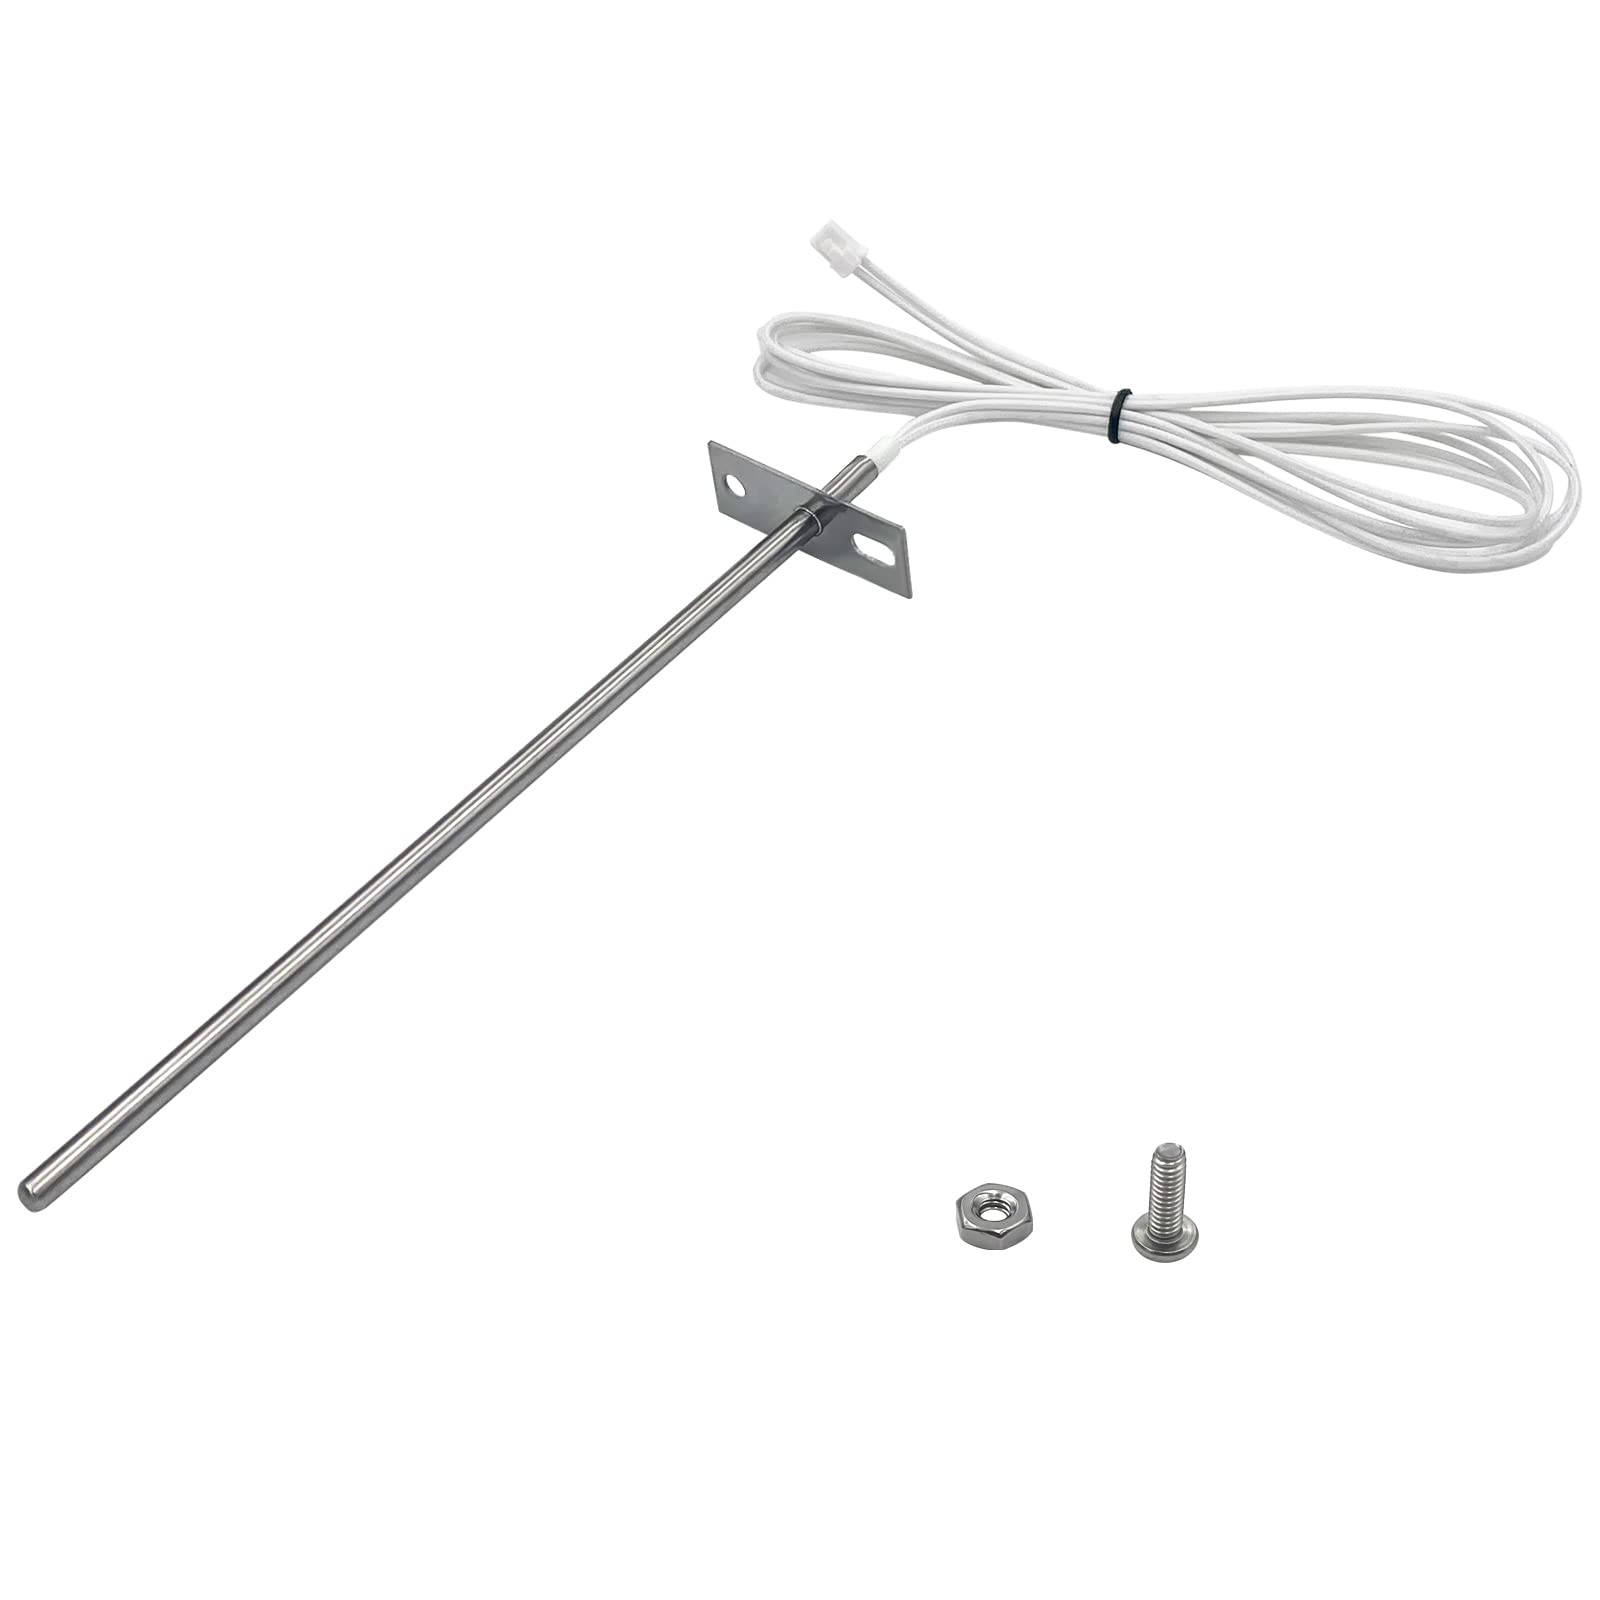 Part PG24-44 RTD Temperature Probe Sensor for Camp Chef Pellet Grills -YAOAWE